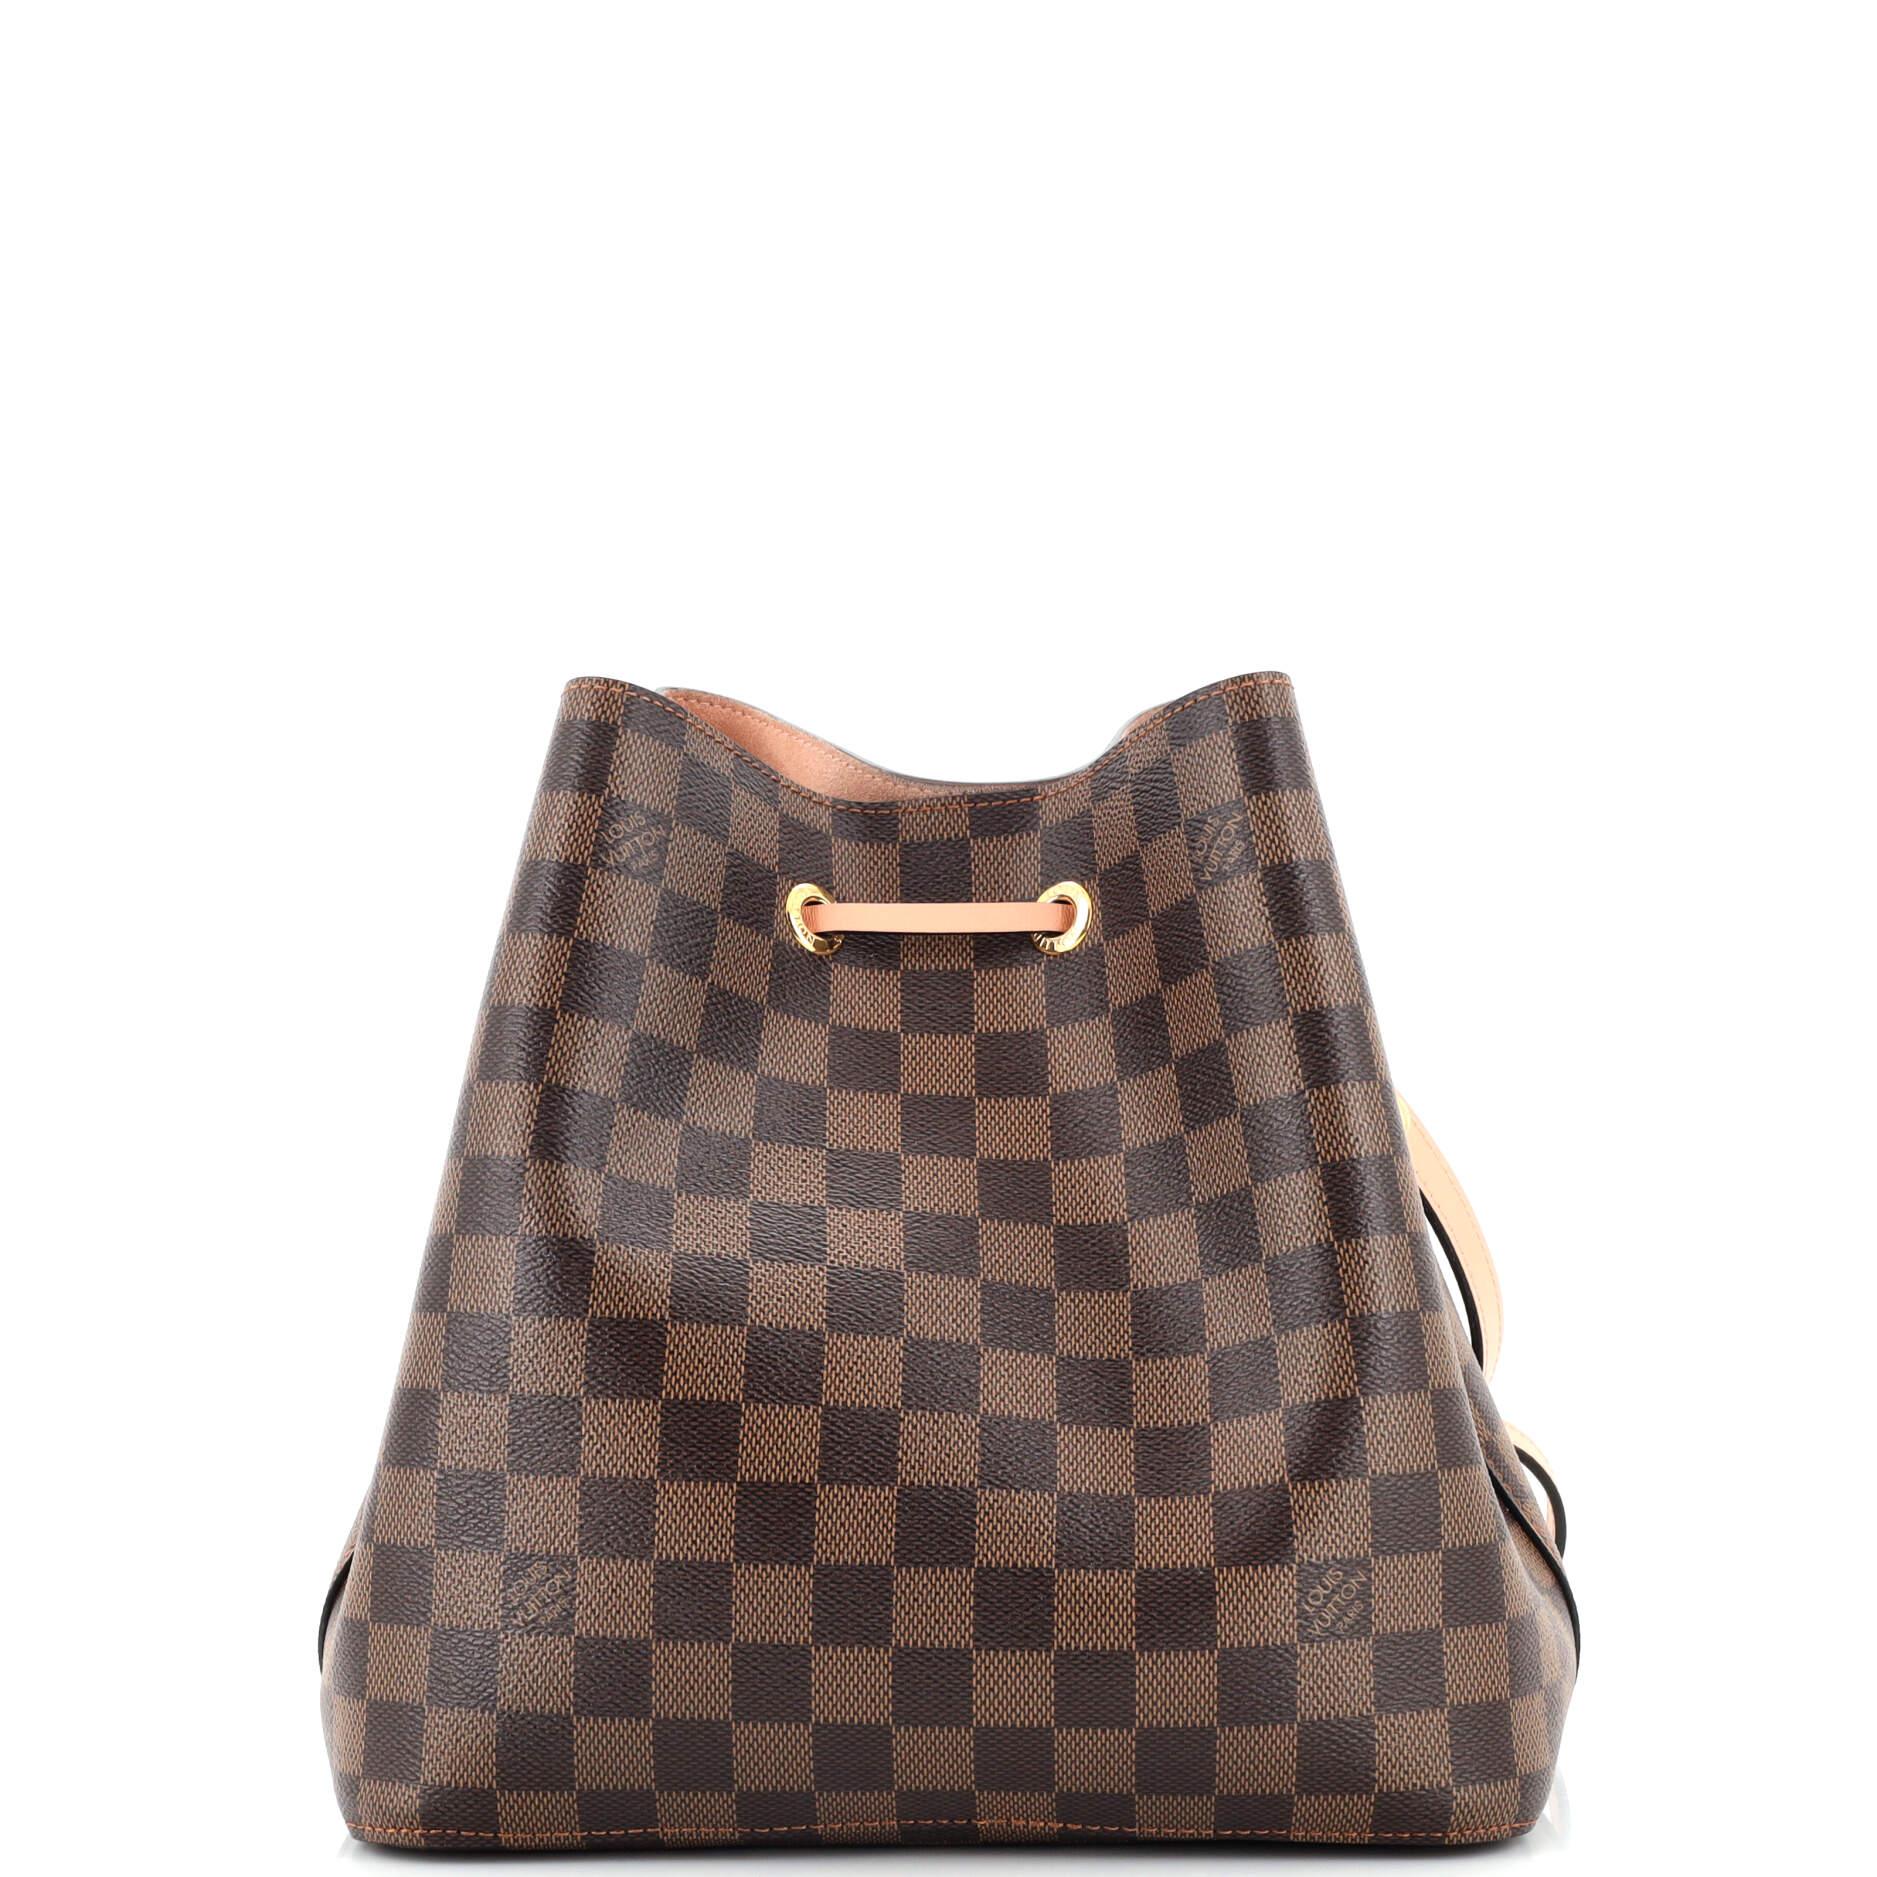 Louis Vuitton NeoNoe Handbag Damier MM In Good Condition For Sale In NY, NY